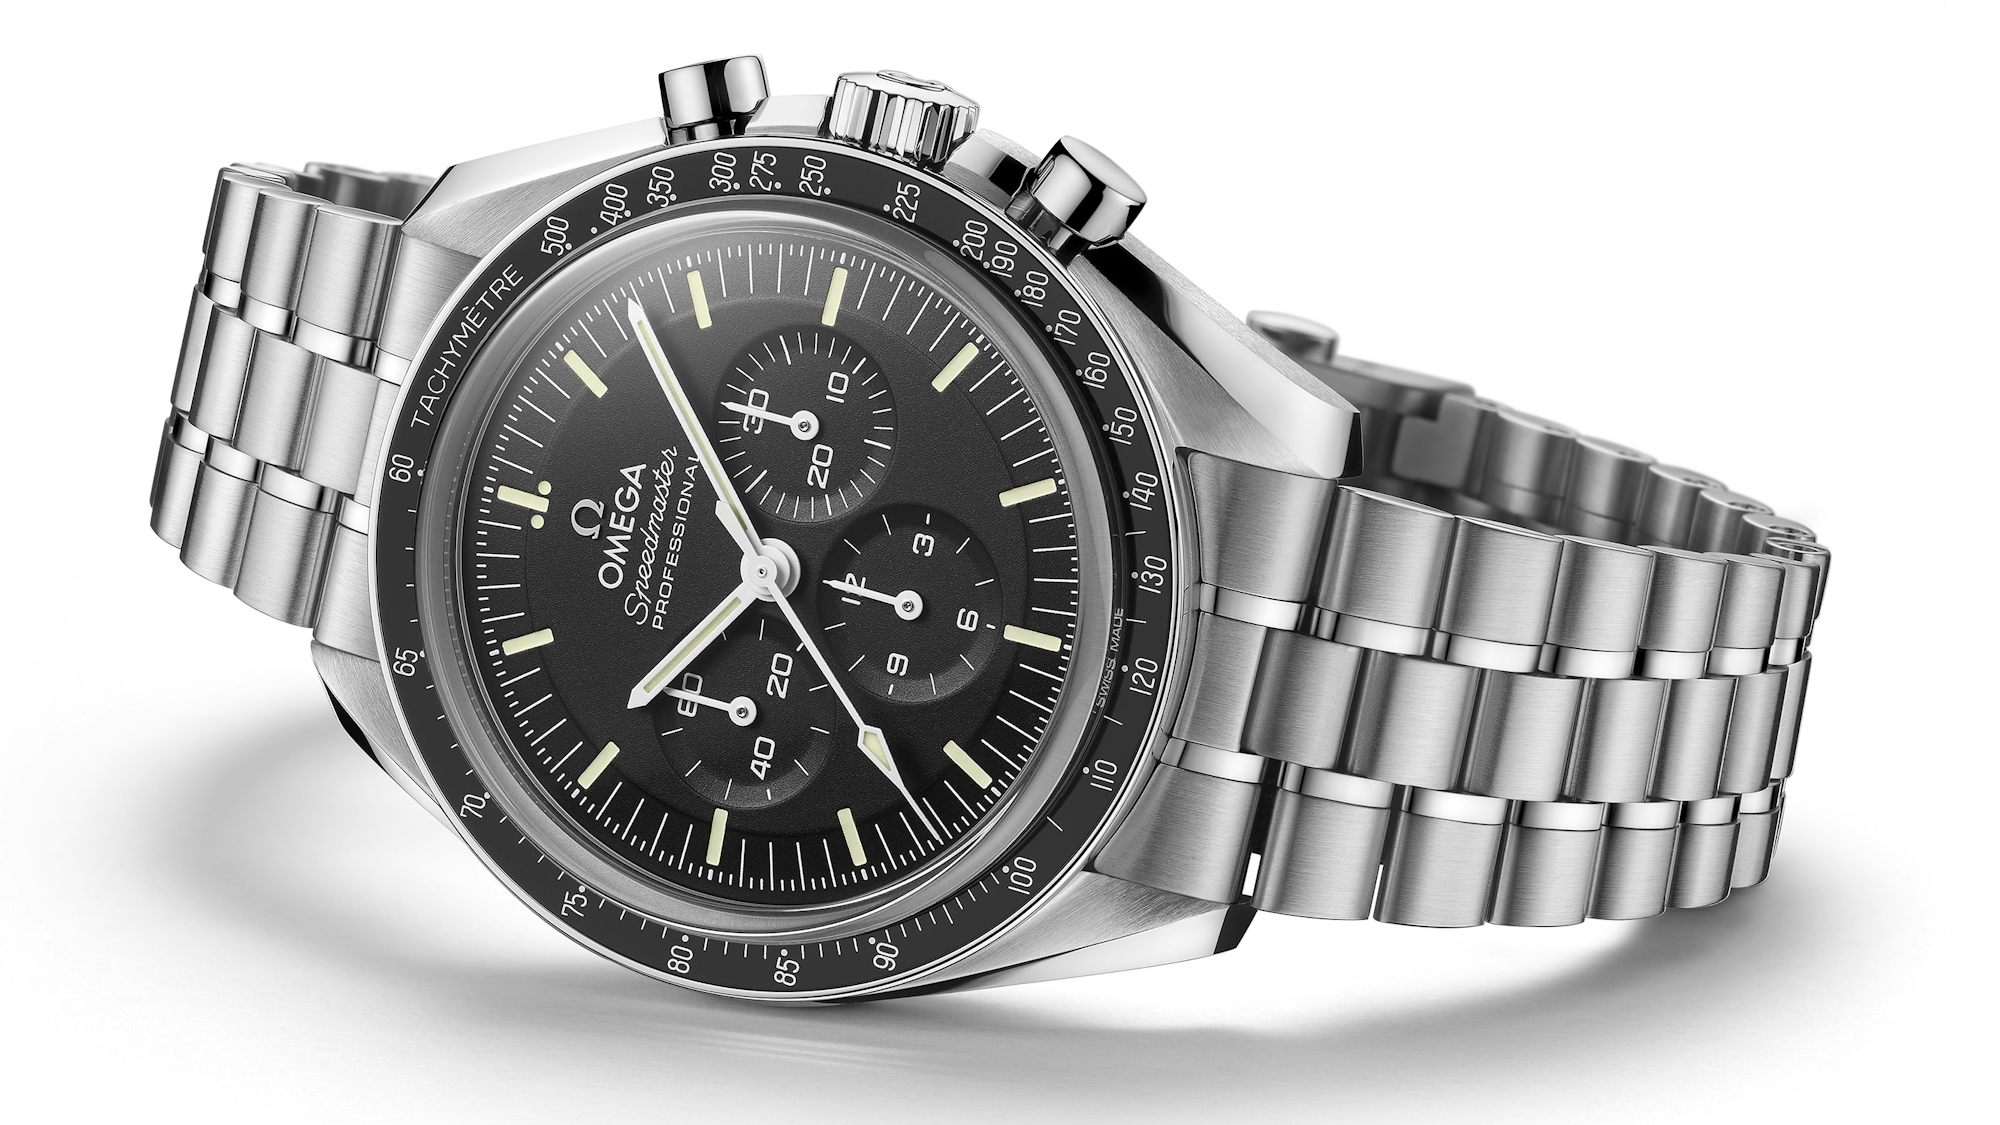 Introducing: The Omega Speedmaster Professional Moonwatch 'Master